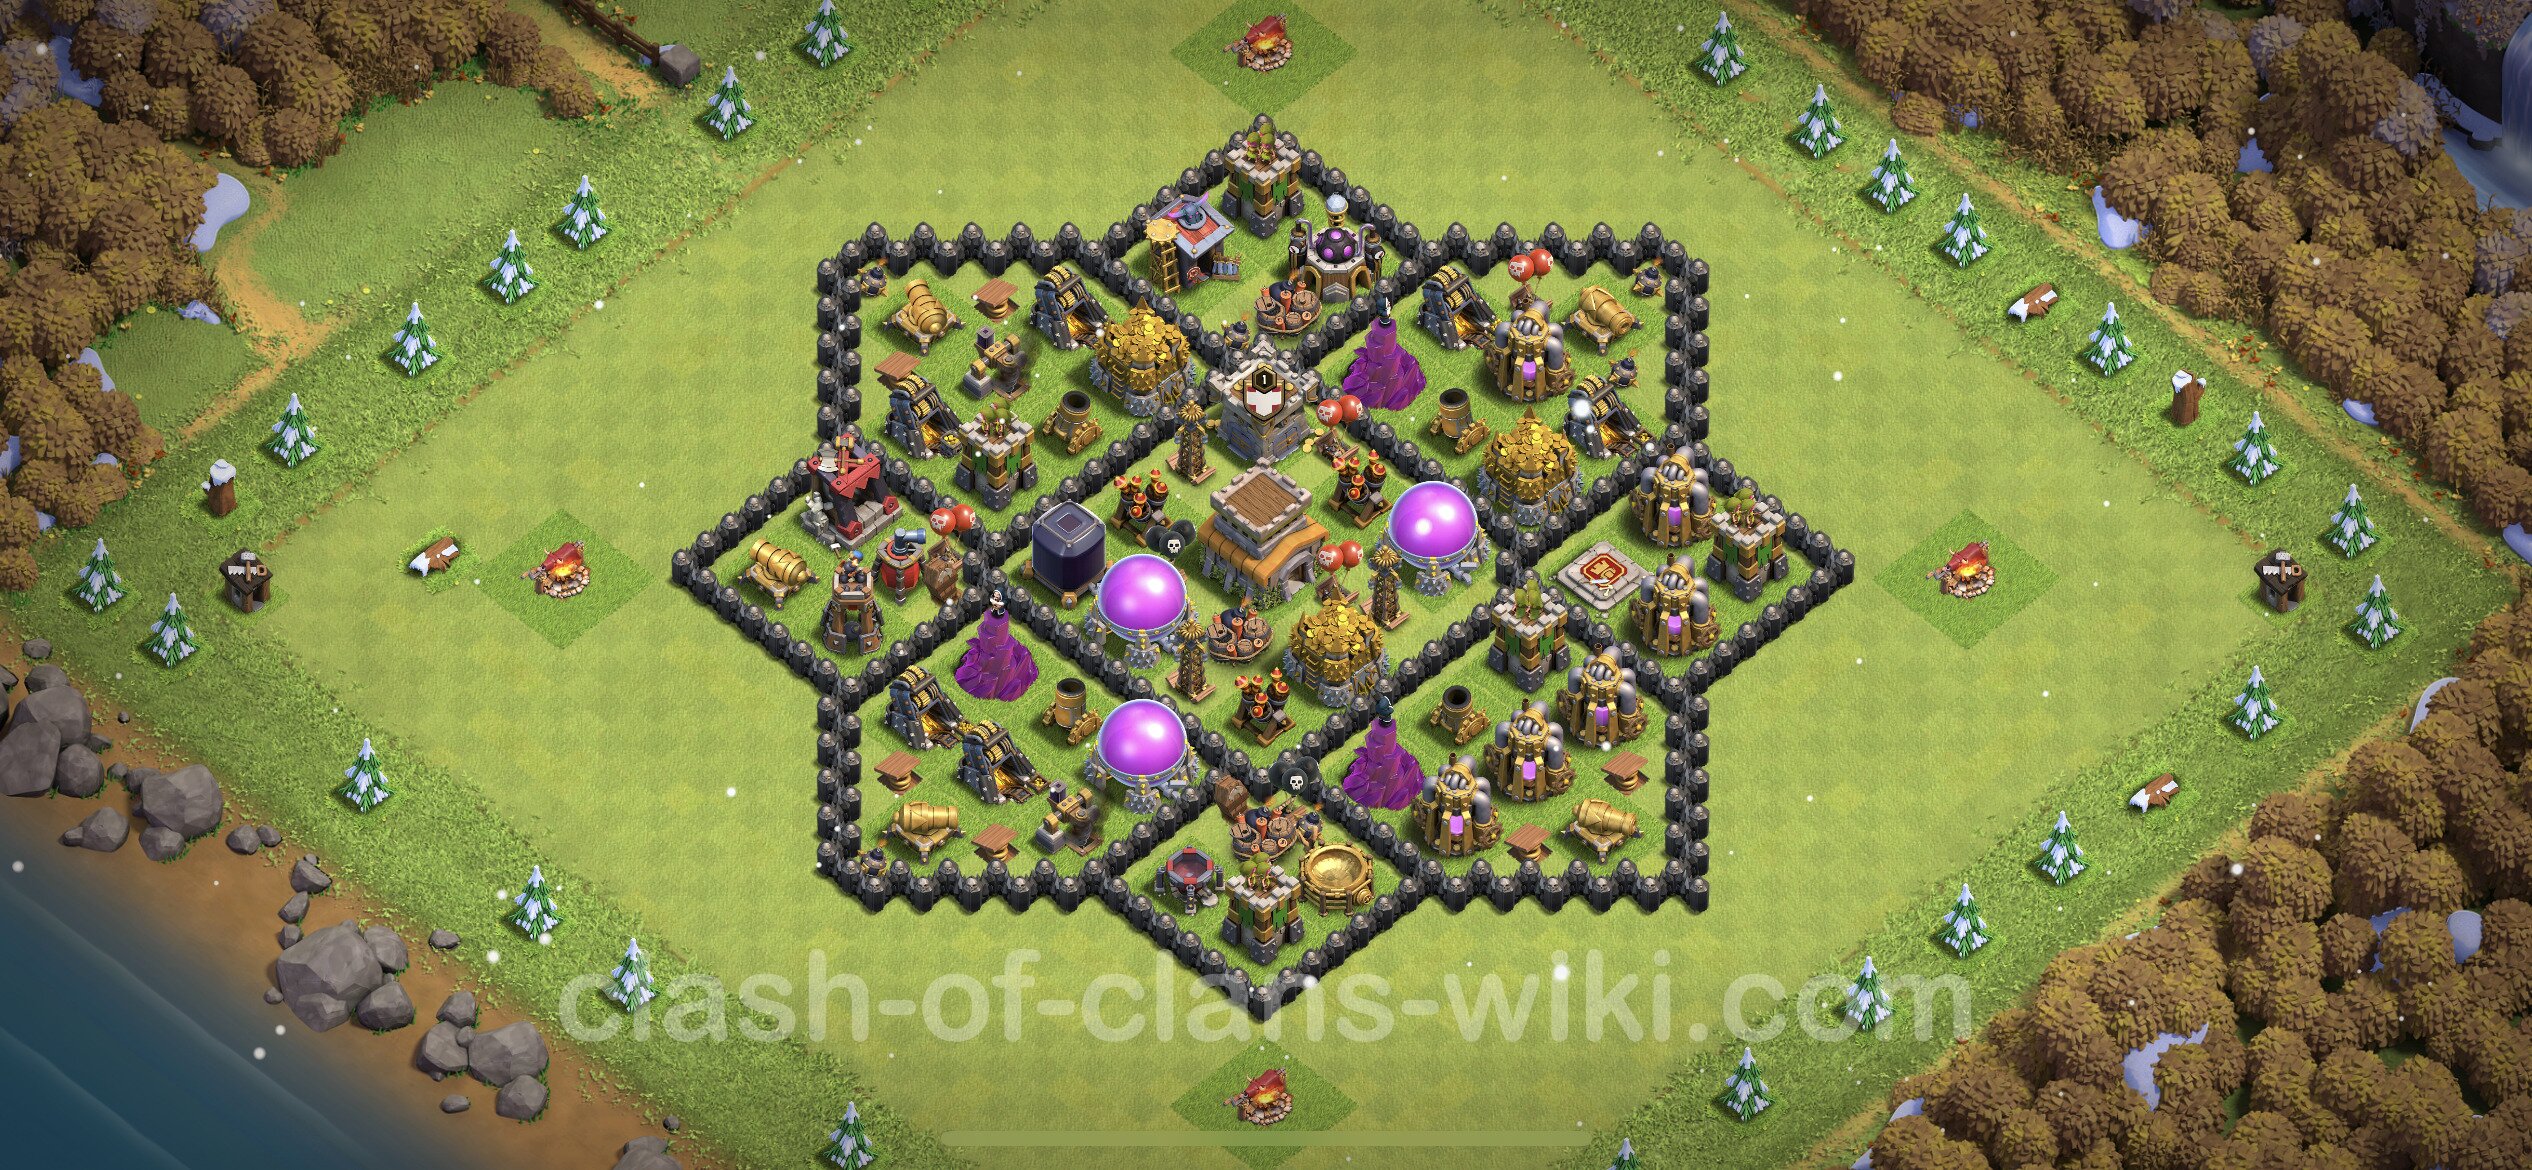 Farming Base TH8 with Link, Hybrid - plan / layout / design - Clash of ...